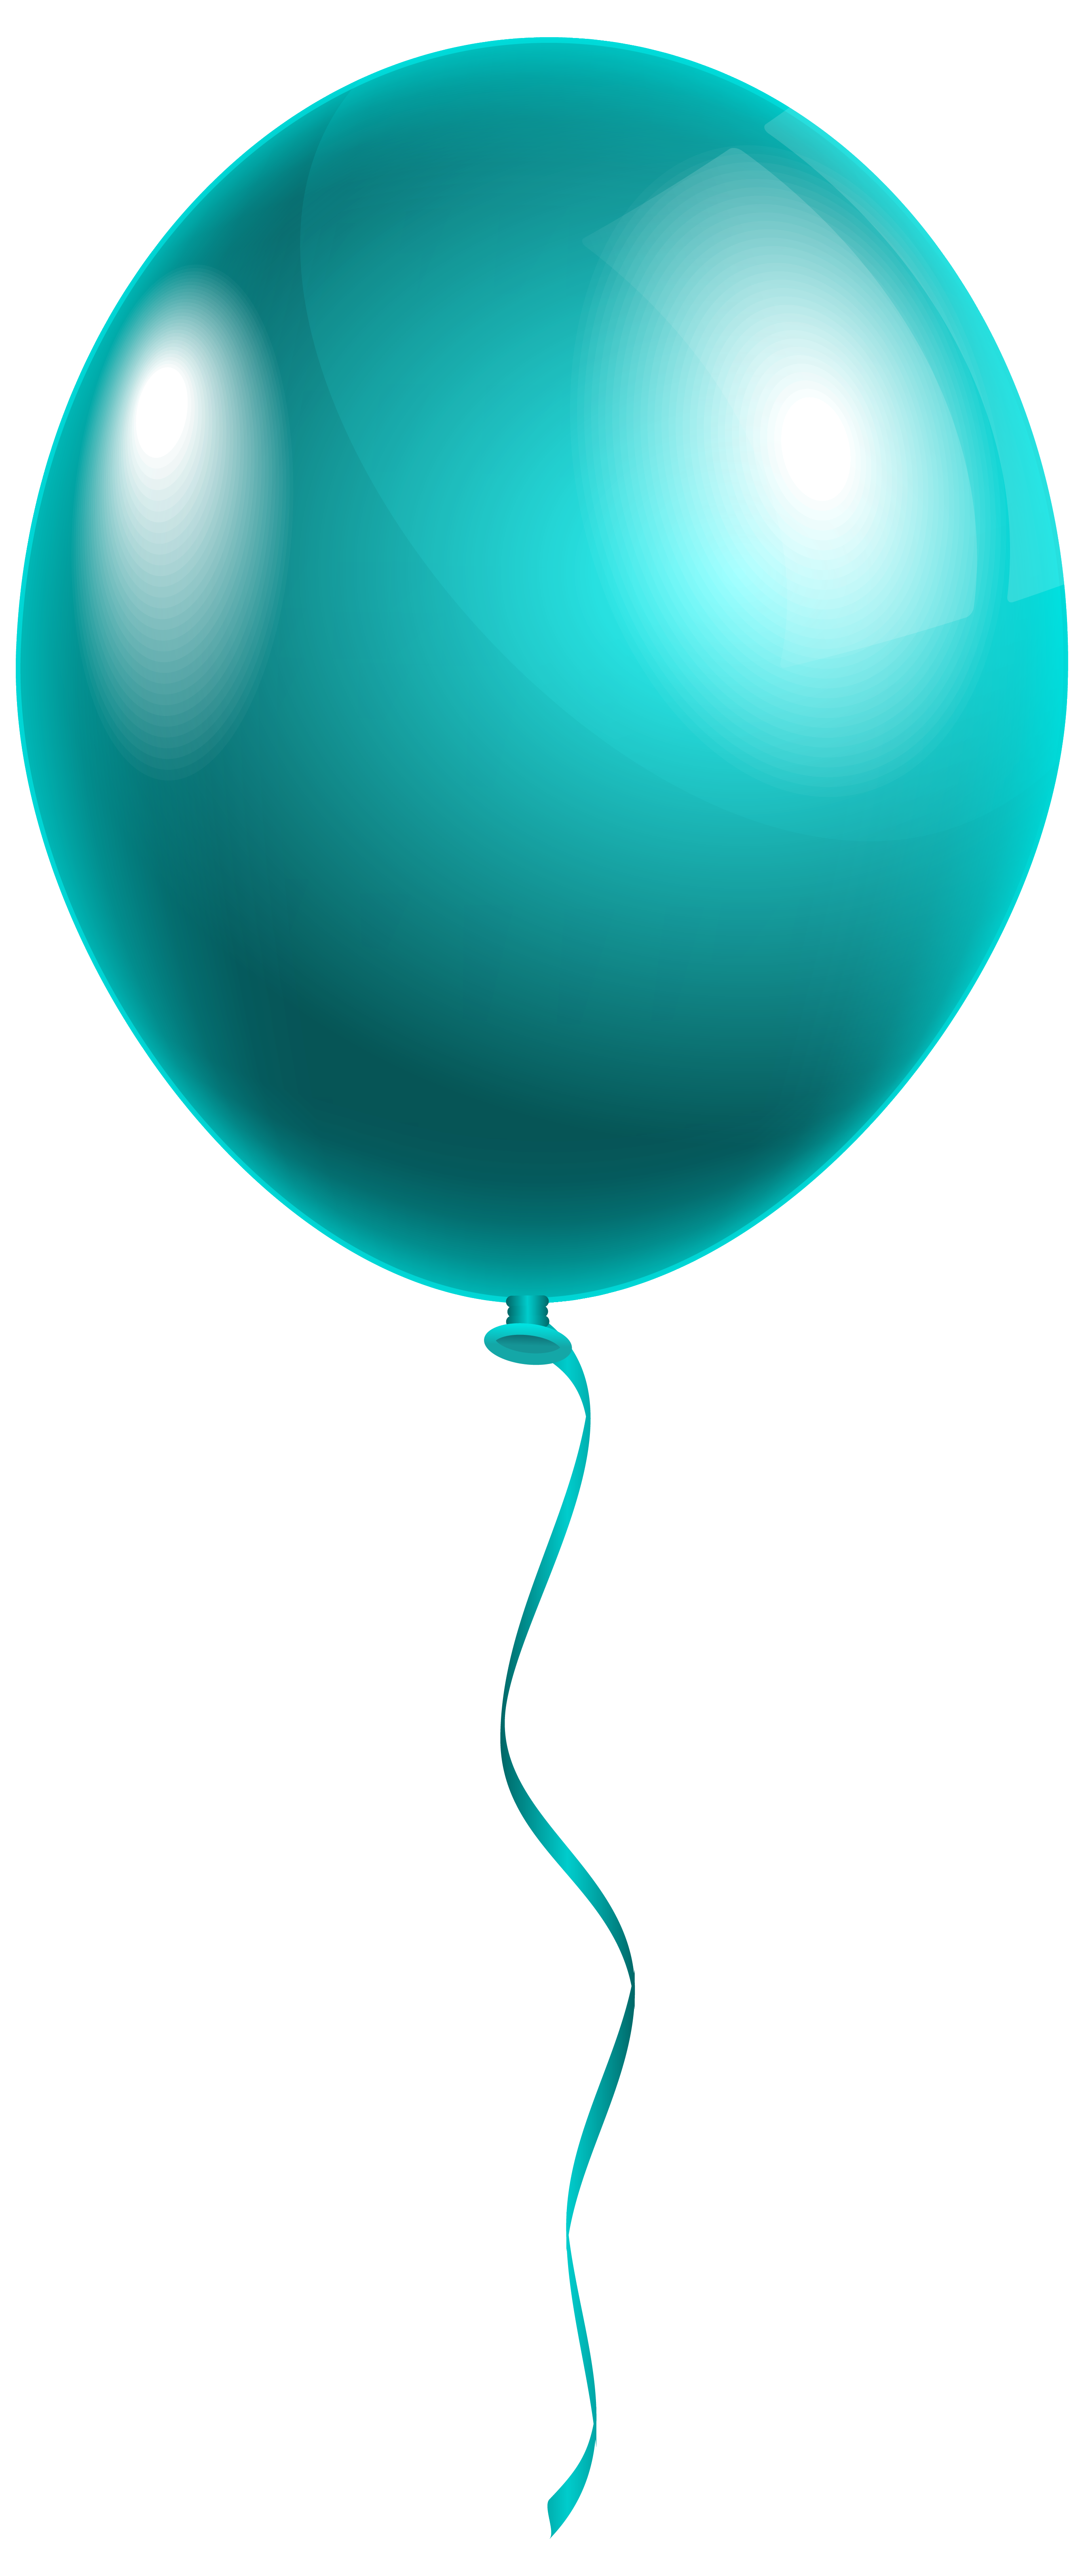 Single Balloons Png - ClipArt Best